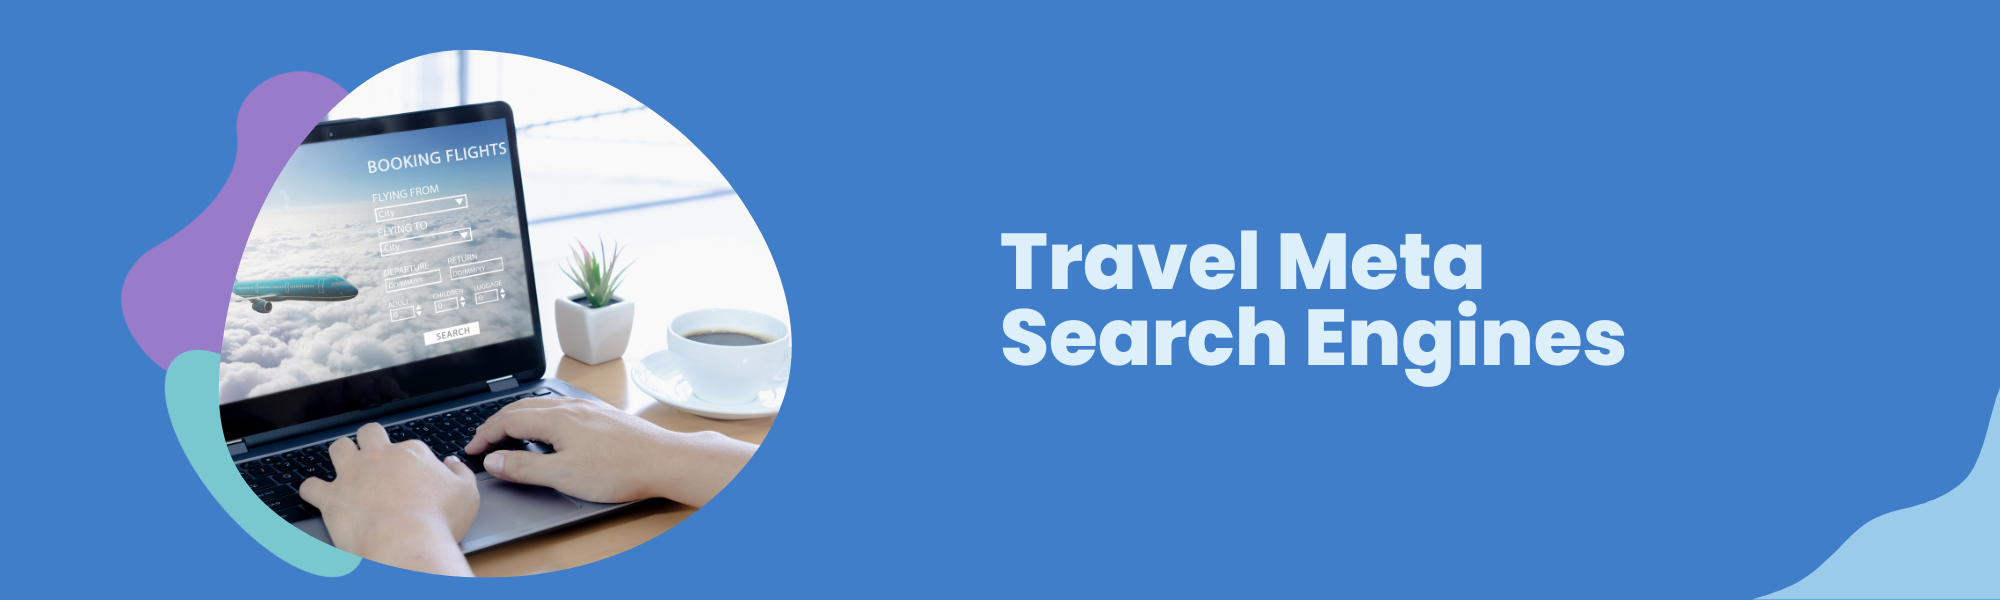 travel package search engines